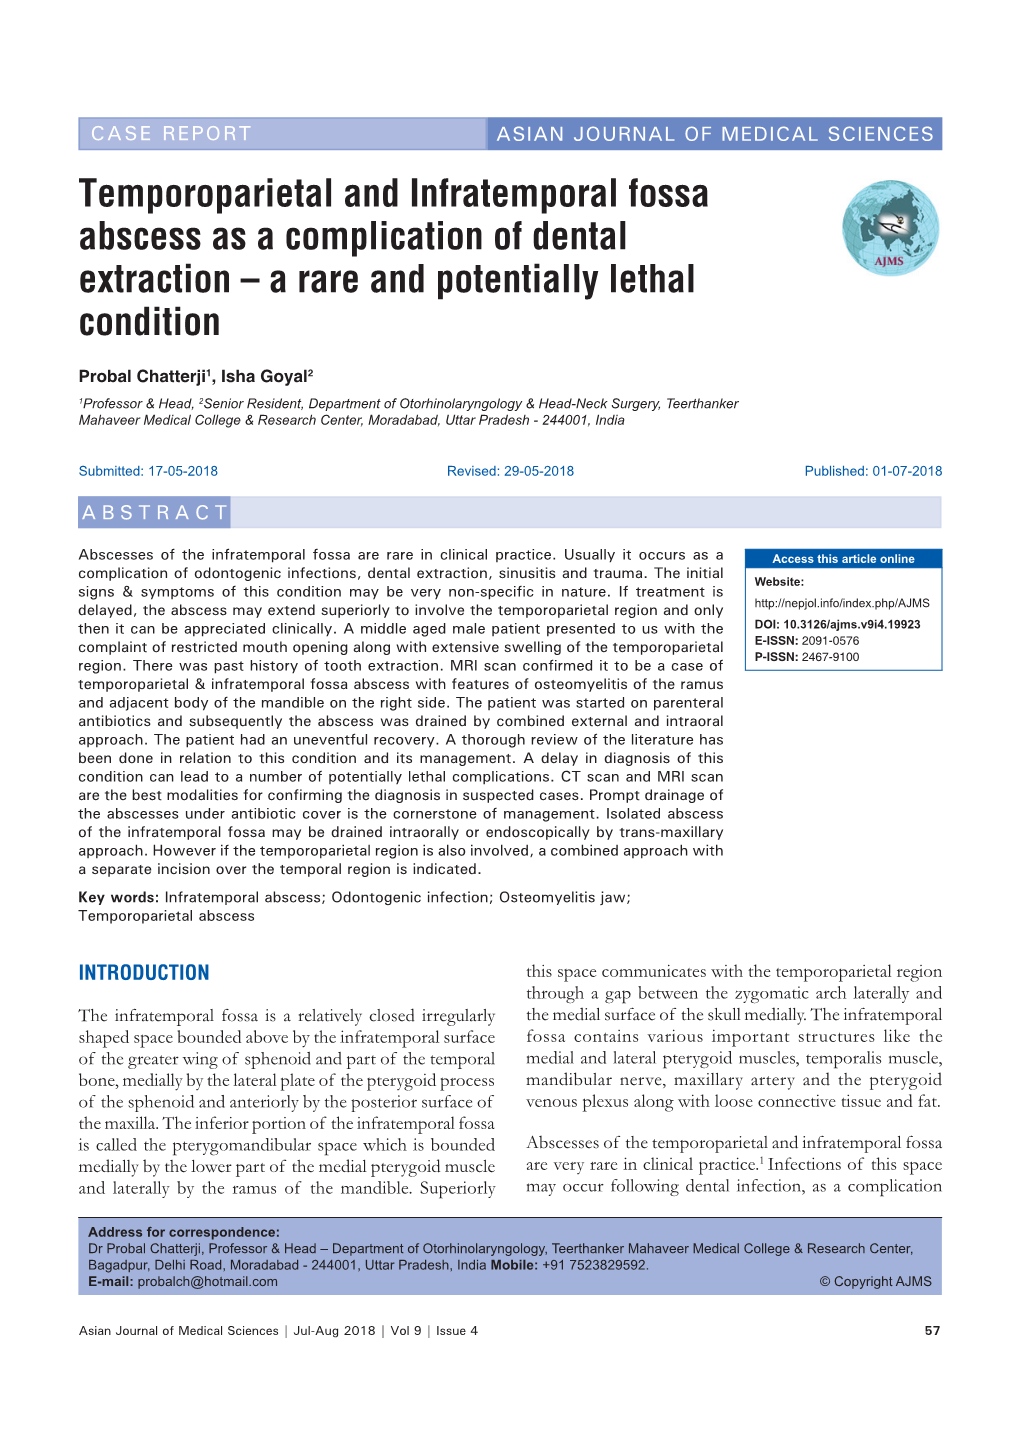 Temporoparietal and Infratemporal Fossa Abscess As a Complication of Dental Extraction – a Rare and Potentially Lethal Condition